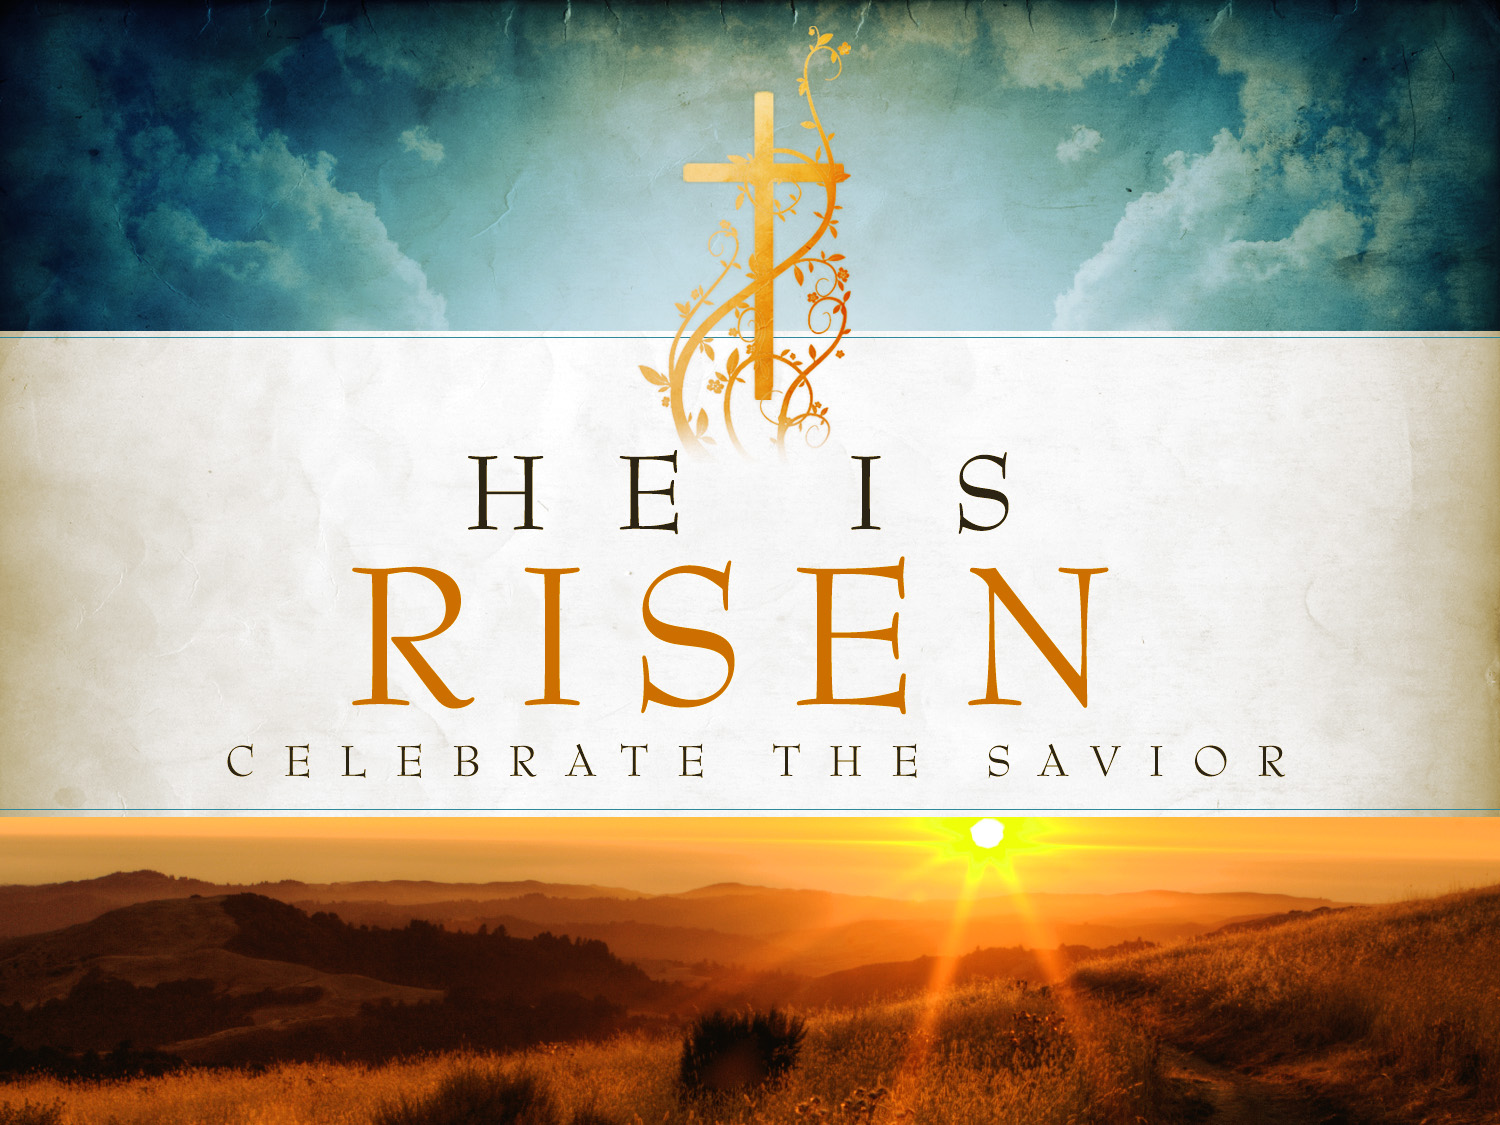 Resurrection Easter Background Image Amp Pictures Becuo